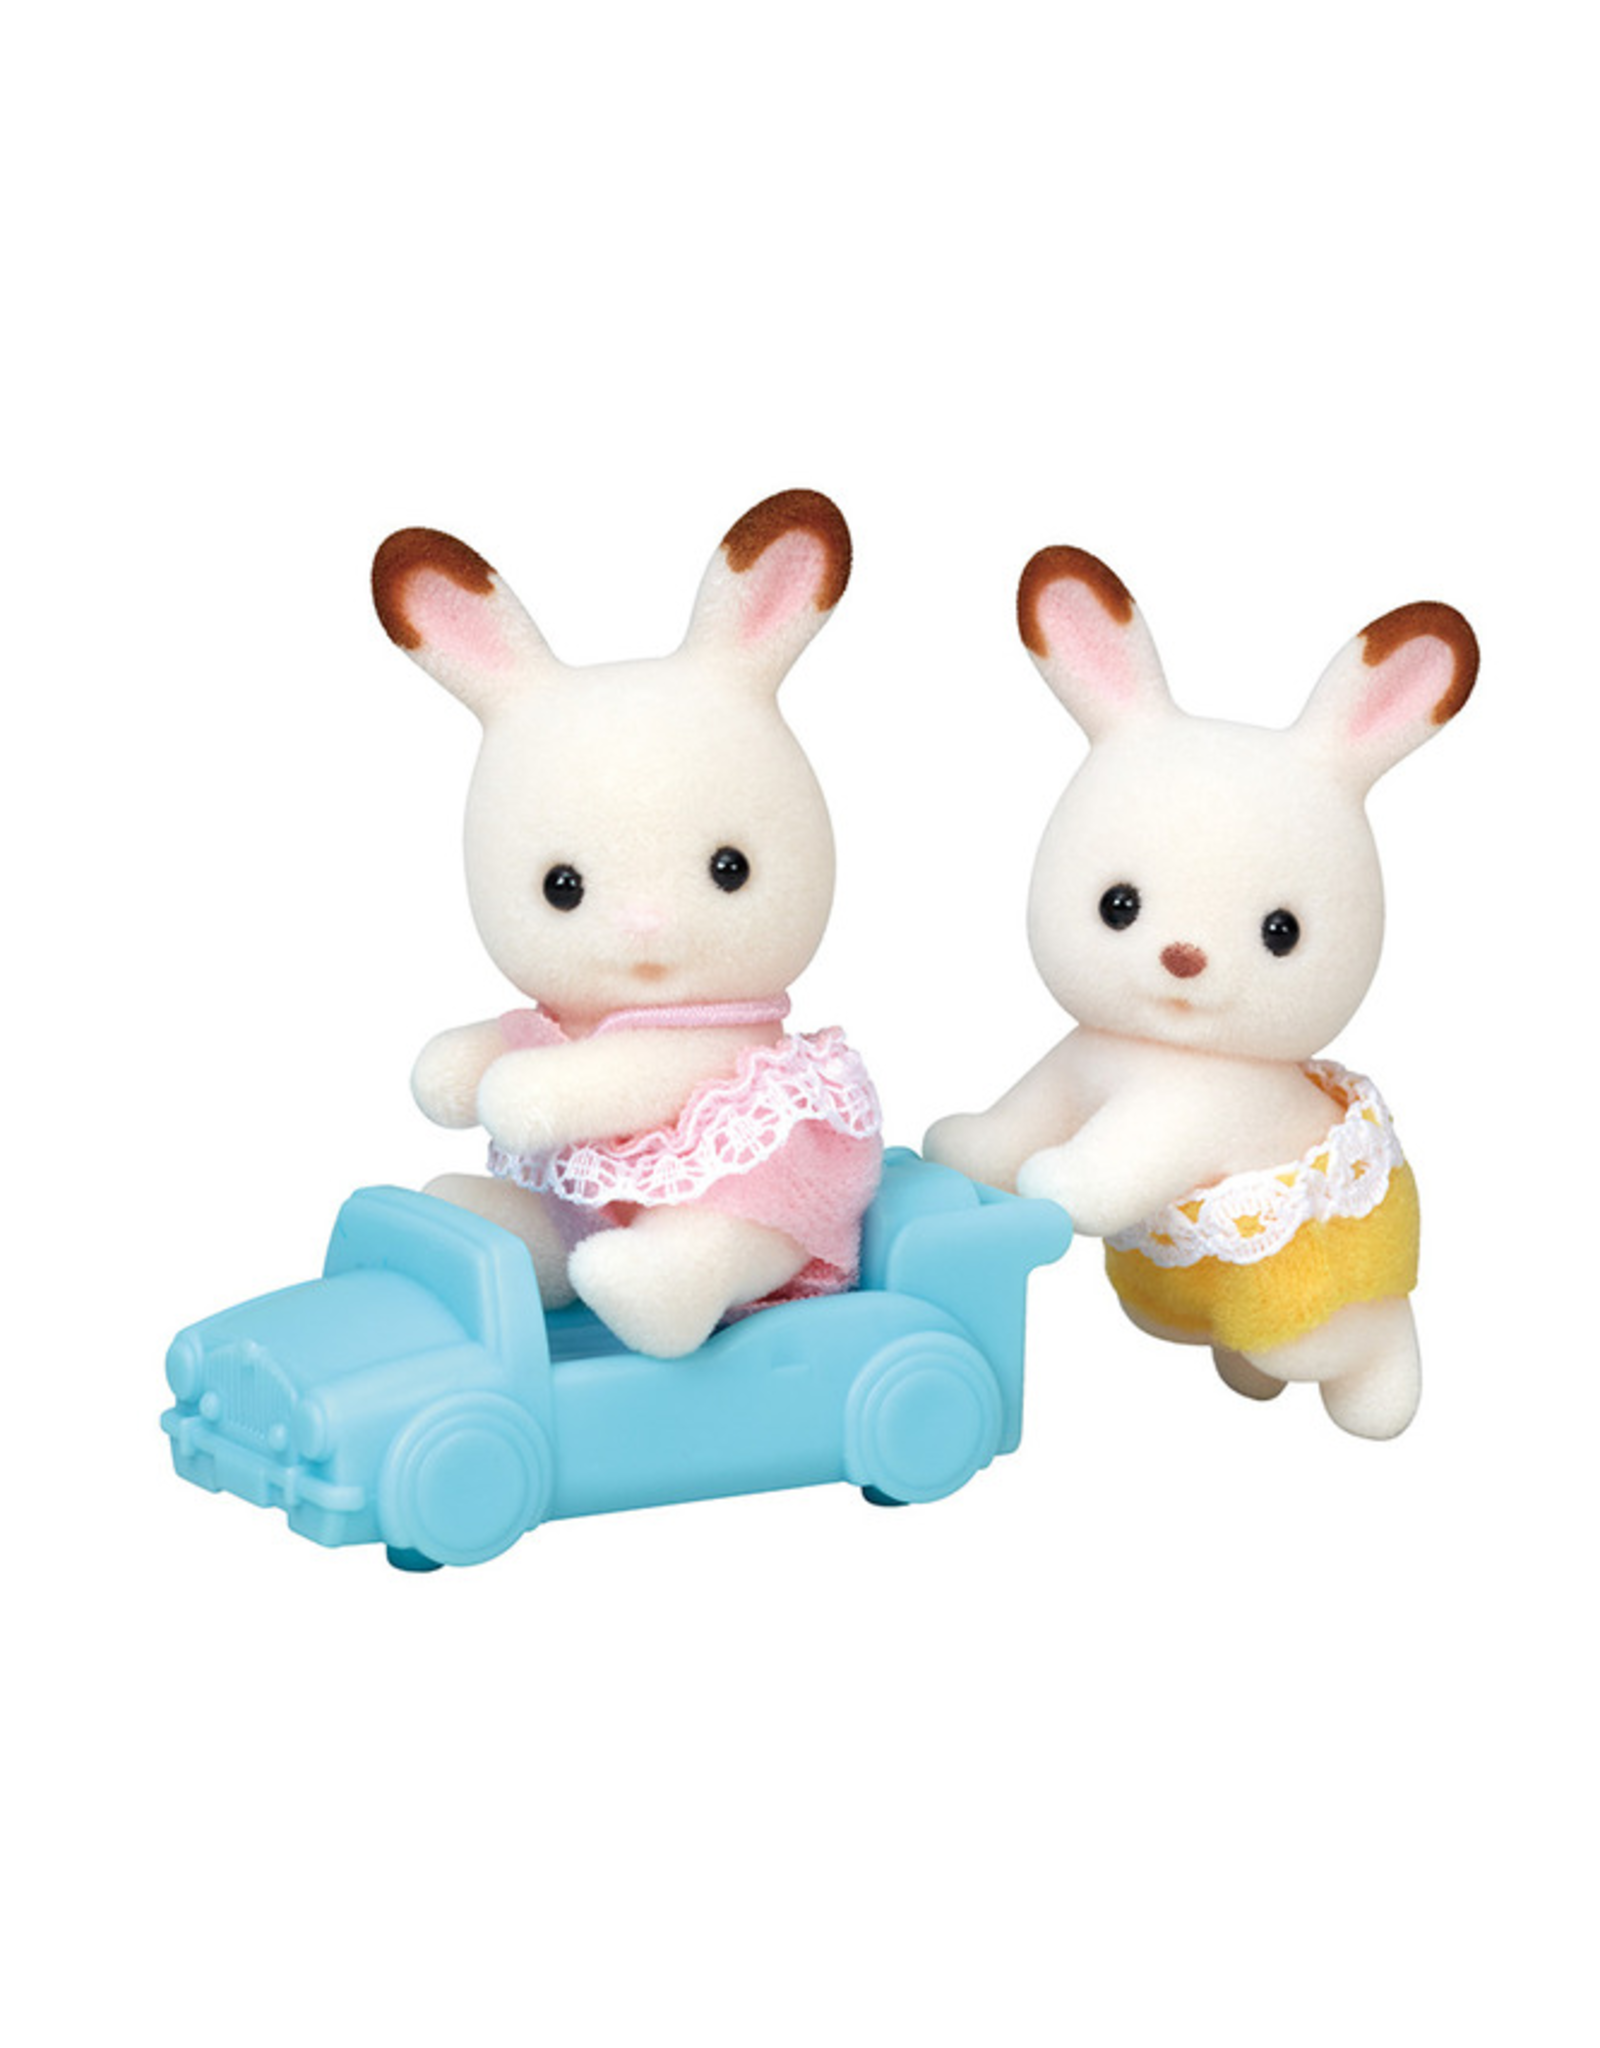 Calico Critters Hopscotch Rabbit Twins Kids Gift Toy Dolls Collectible Figures 